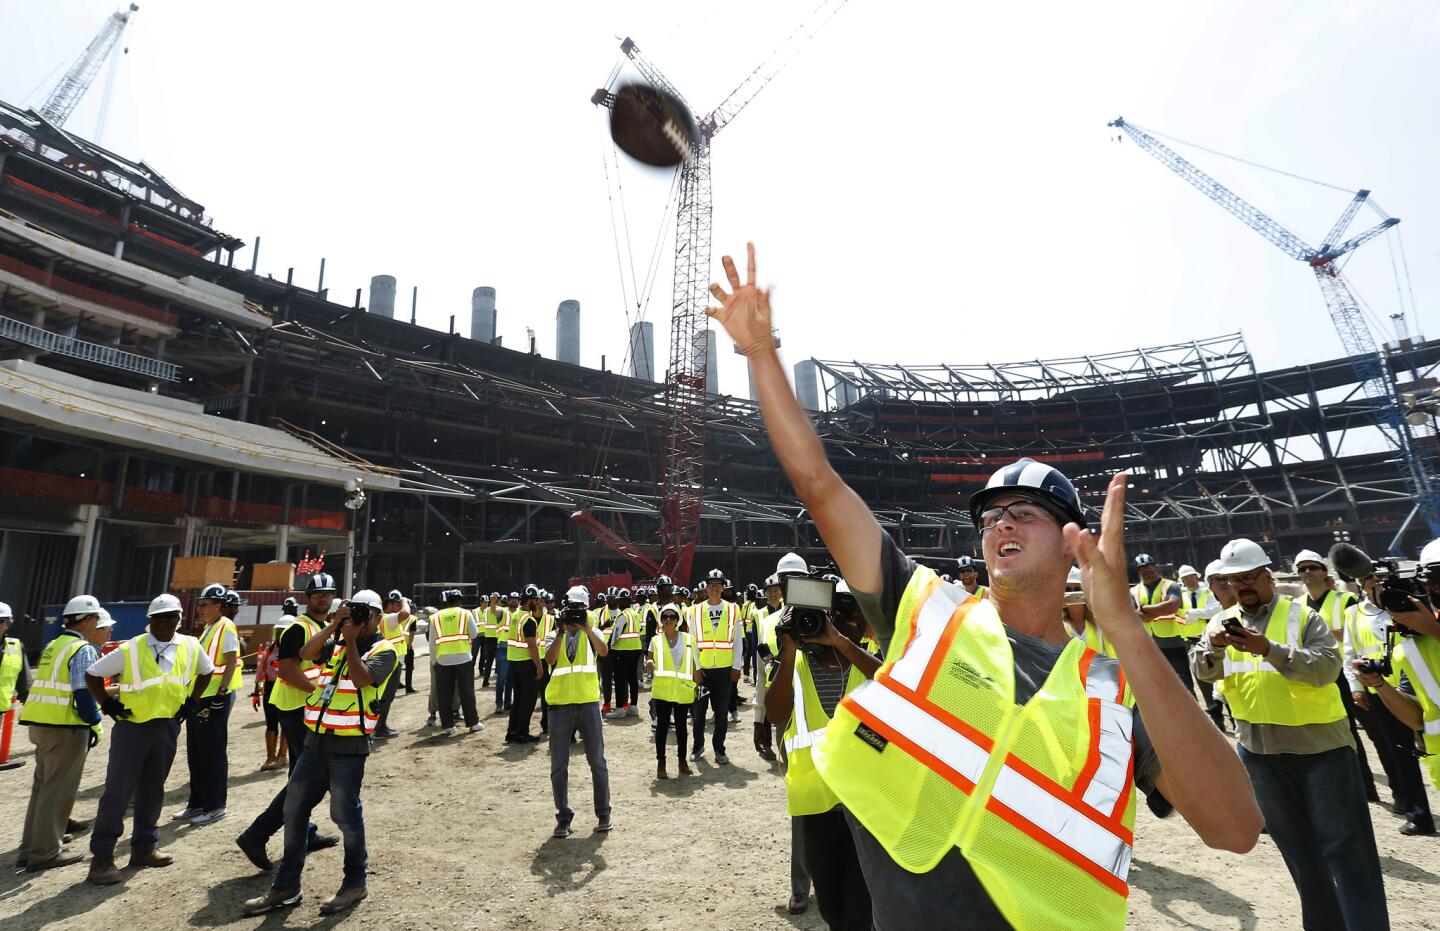 Rams quarterback Jared Goff tosses a football up to construction workers in one of the decks above, during a tour of Los Angeles Stadium at Hollywood Park in Inglewood, the future home of the Rams. Instead of practice on the final day of minicamp, the Rams players and coaches boarded buses and headed to the stadium under construction in Inglewood.